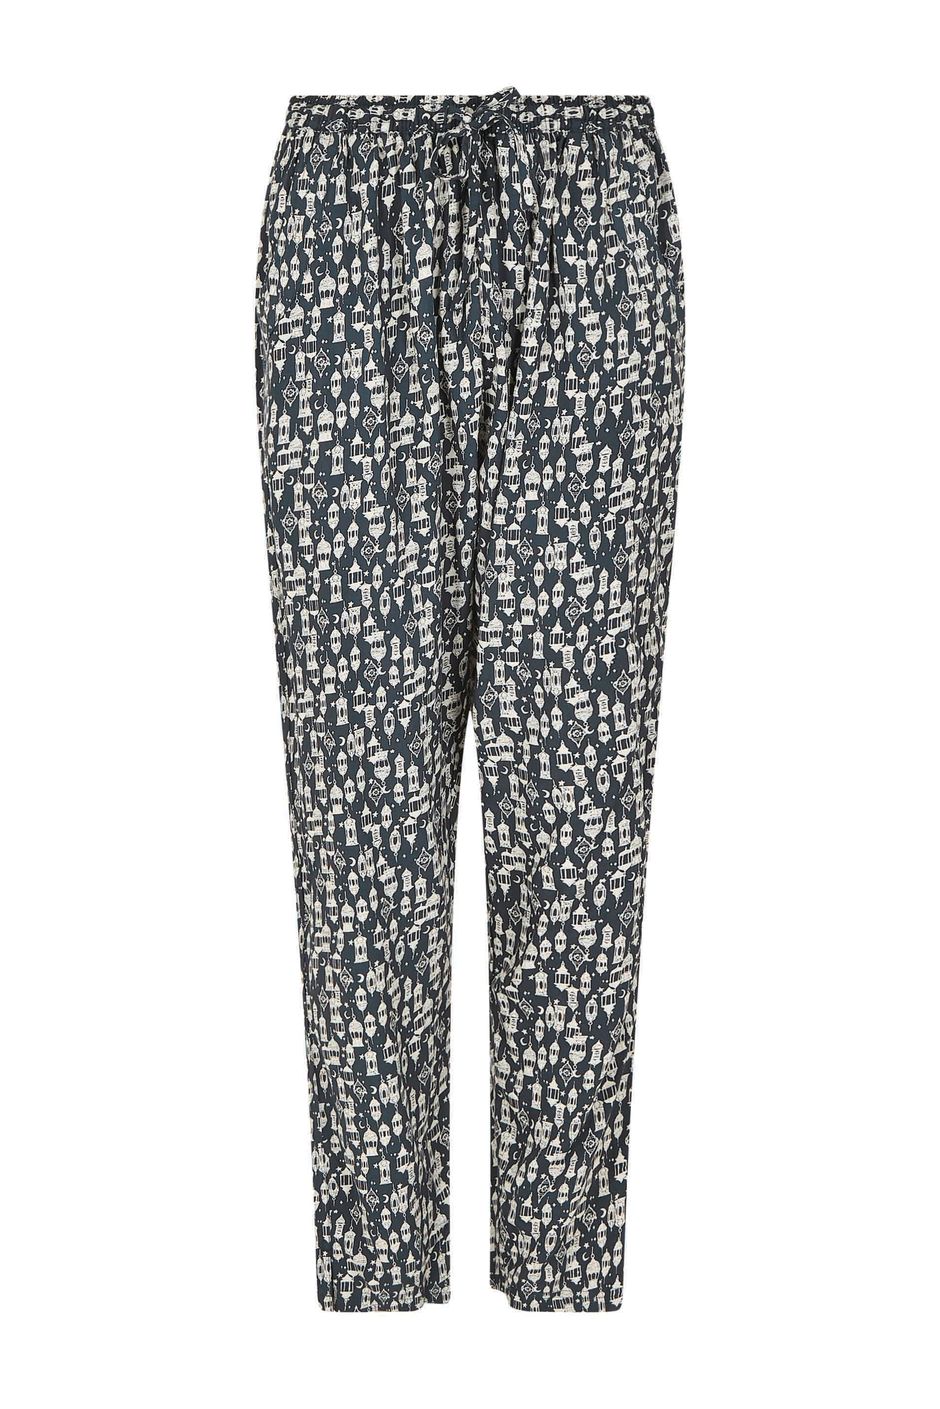 Tinto Eco Viscose Printed Trousers Midnight